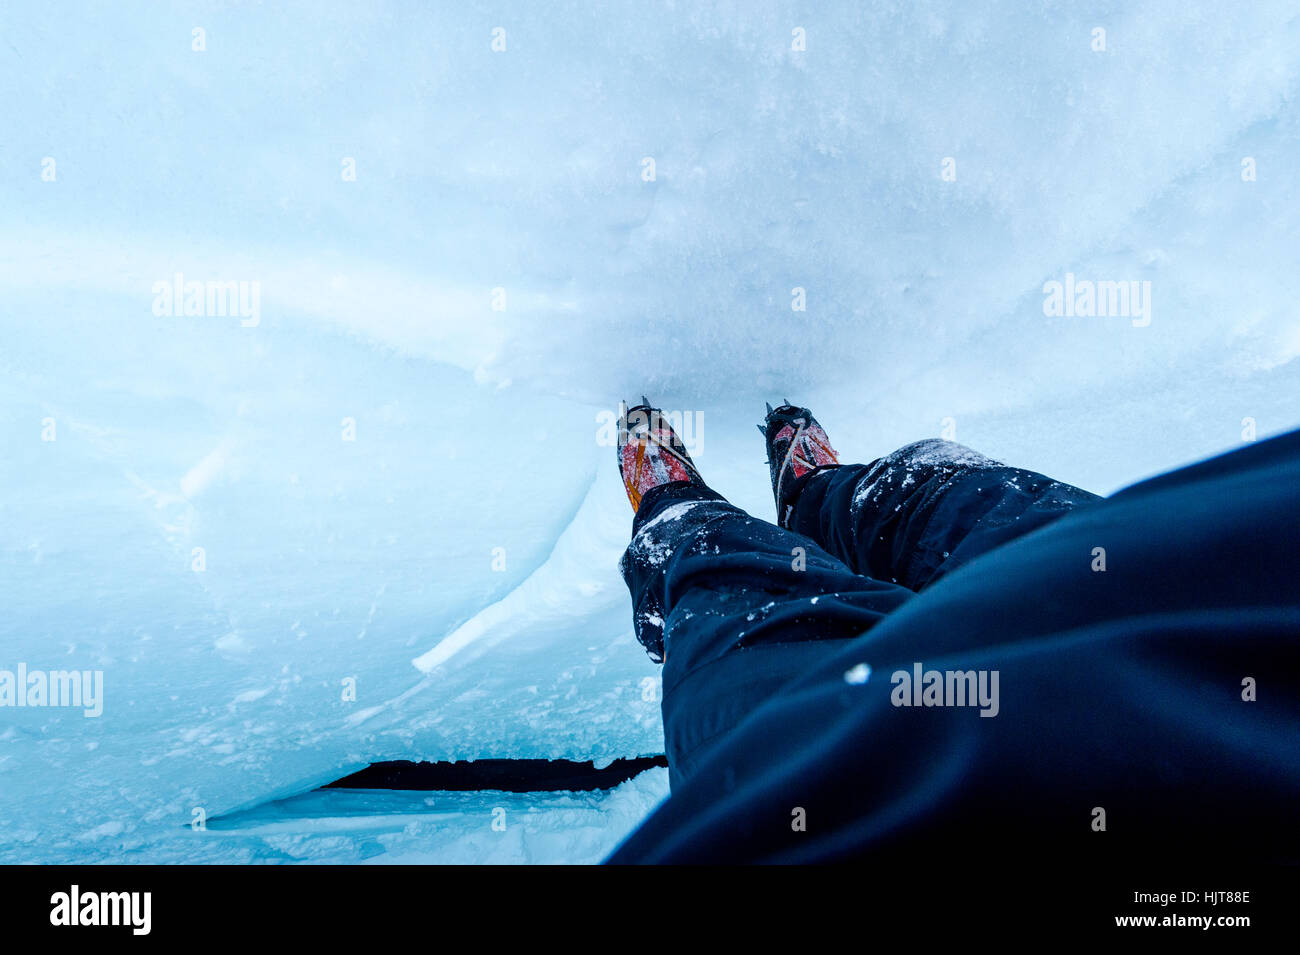 A photographer descending the sheer icy walls of a crevasse on the slopes of Mount Erebus in Antarctica. Stock Photo